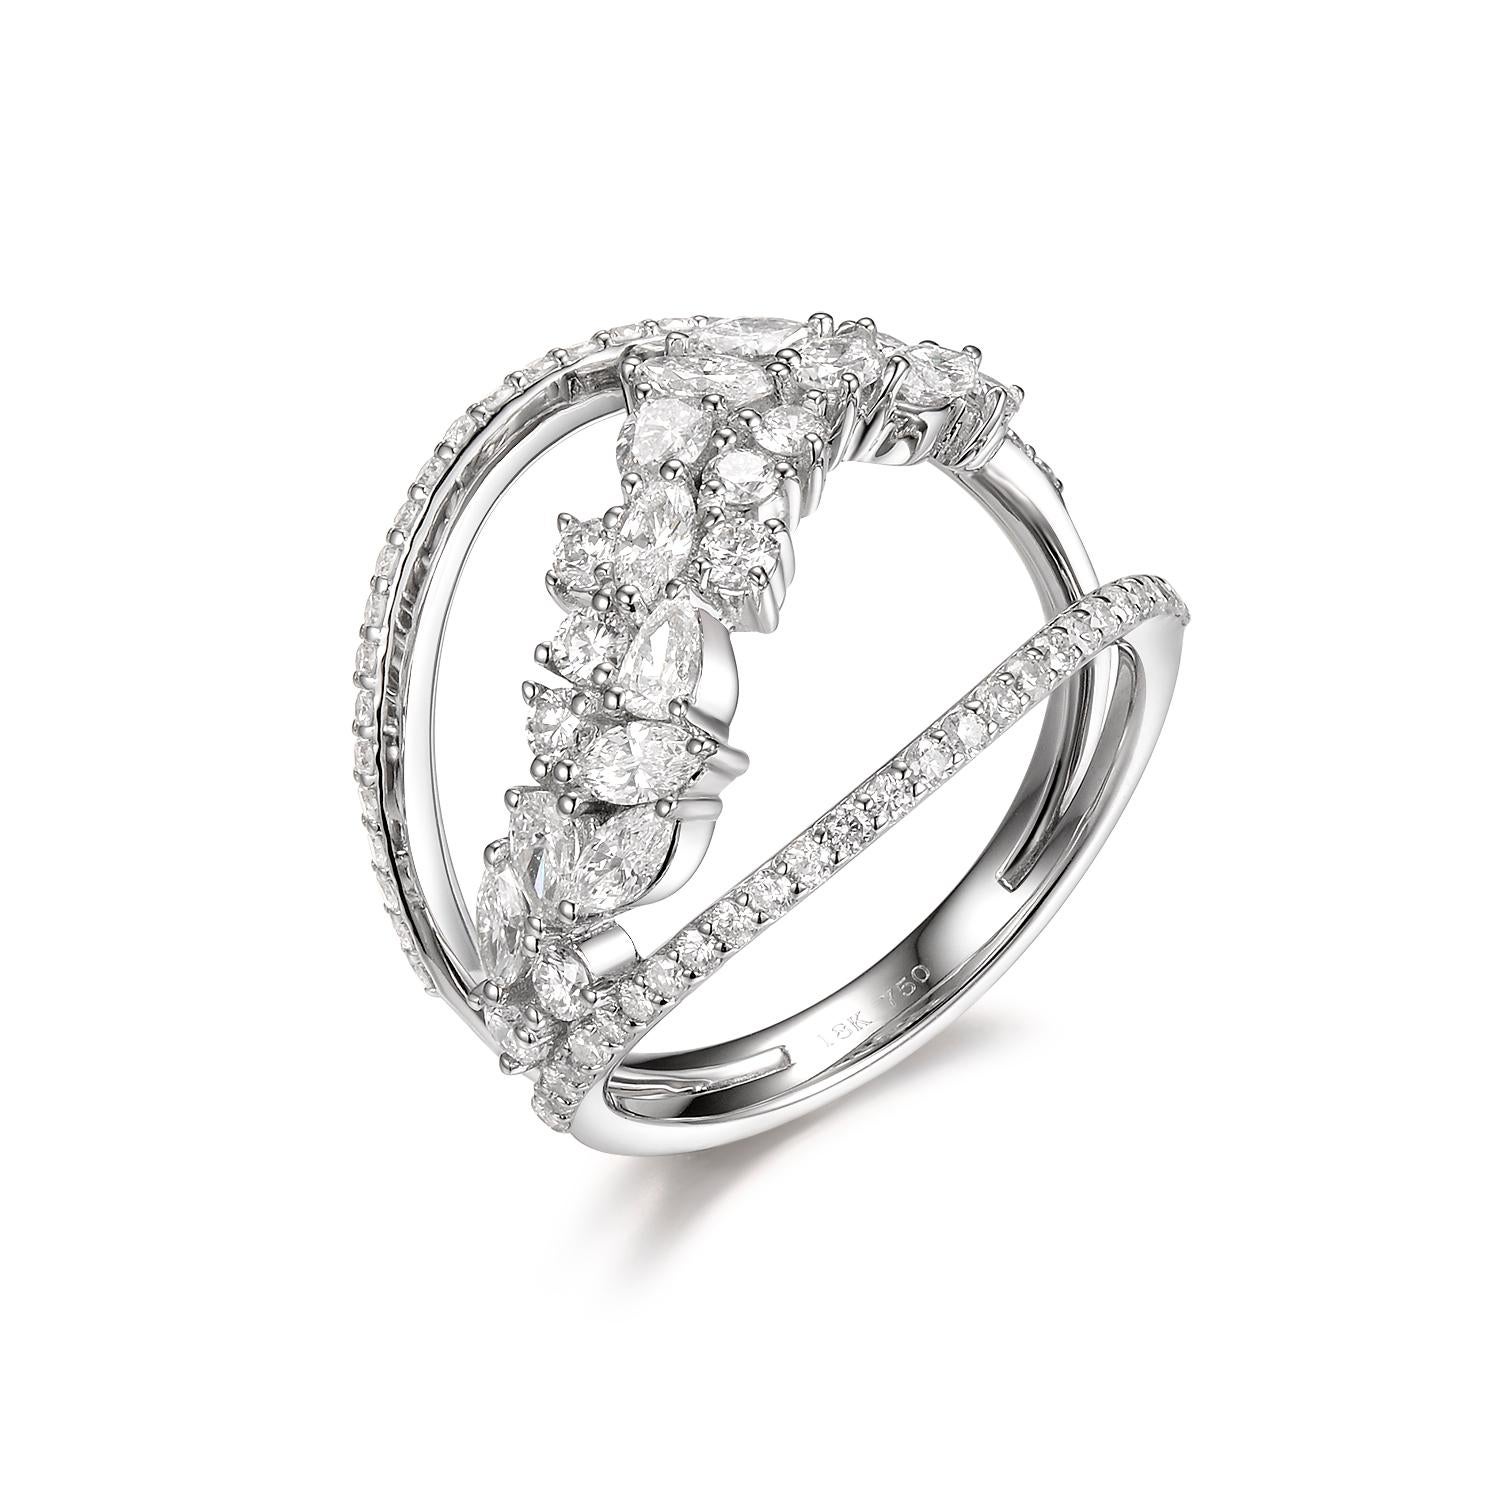 This cluster ring is hand set in 18 karat white gold. it features multiple shape diamonds. 7 marquise diamond weight 0.44 ct assented with 4 pear diamonds weight 0.27. Total carat weight is 1.38. It is stack-able with other diamond bands of your